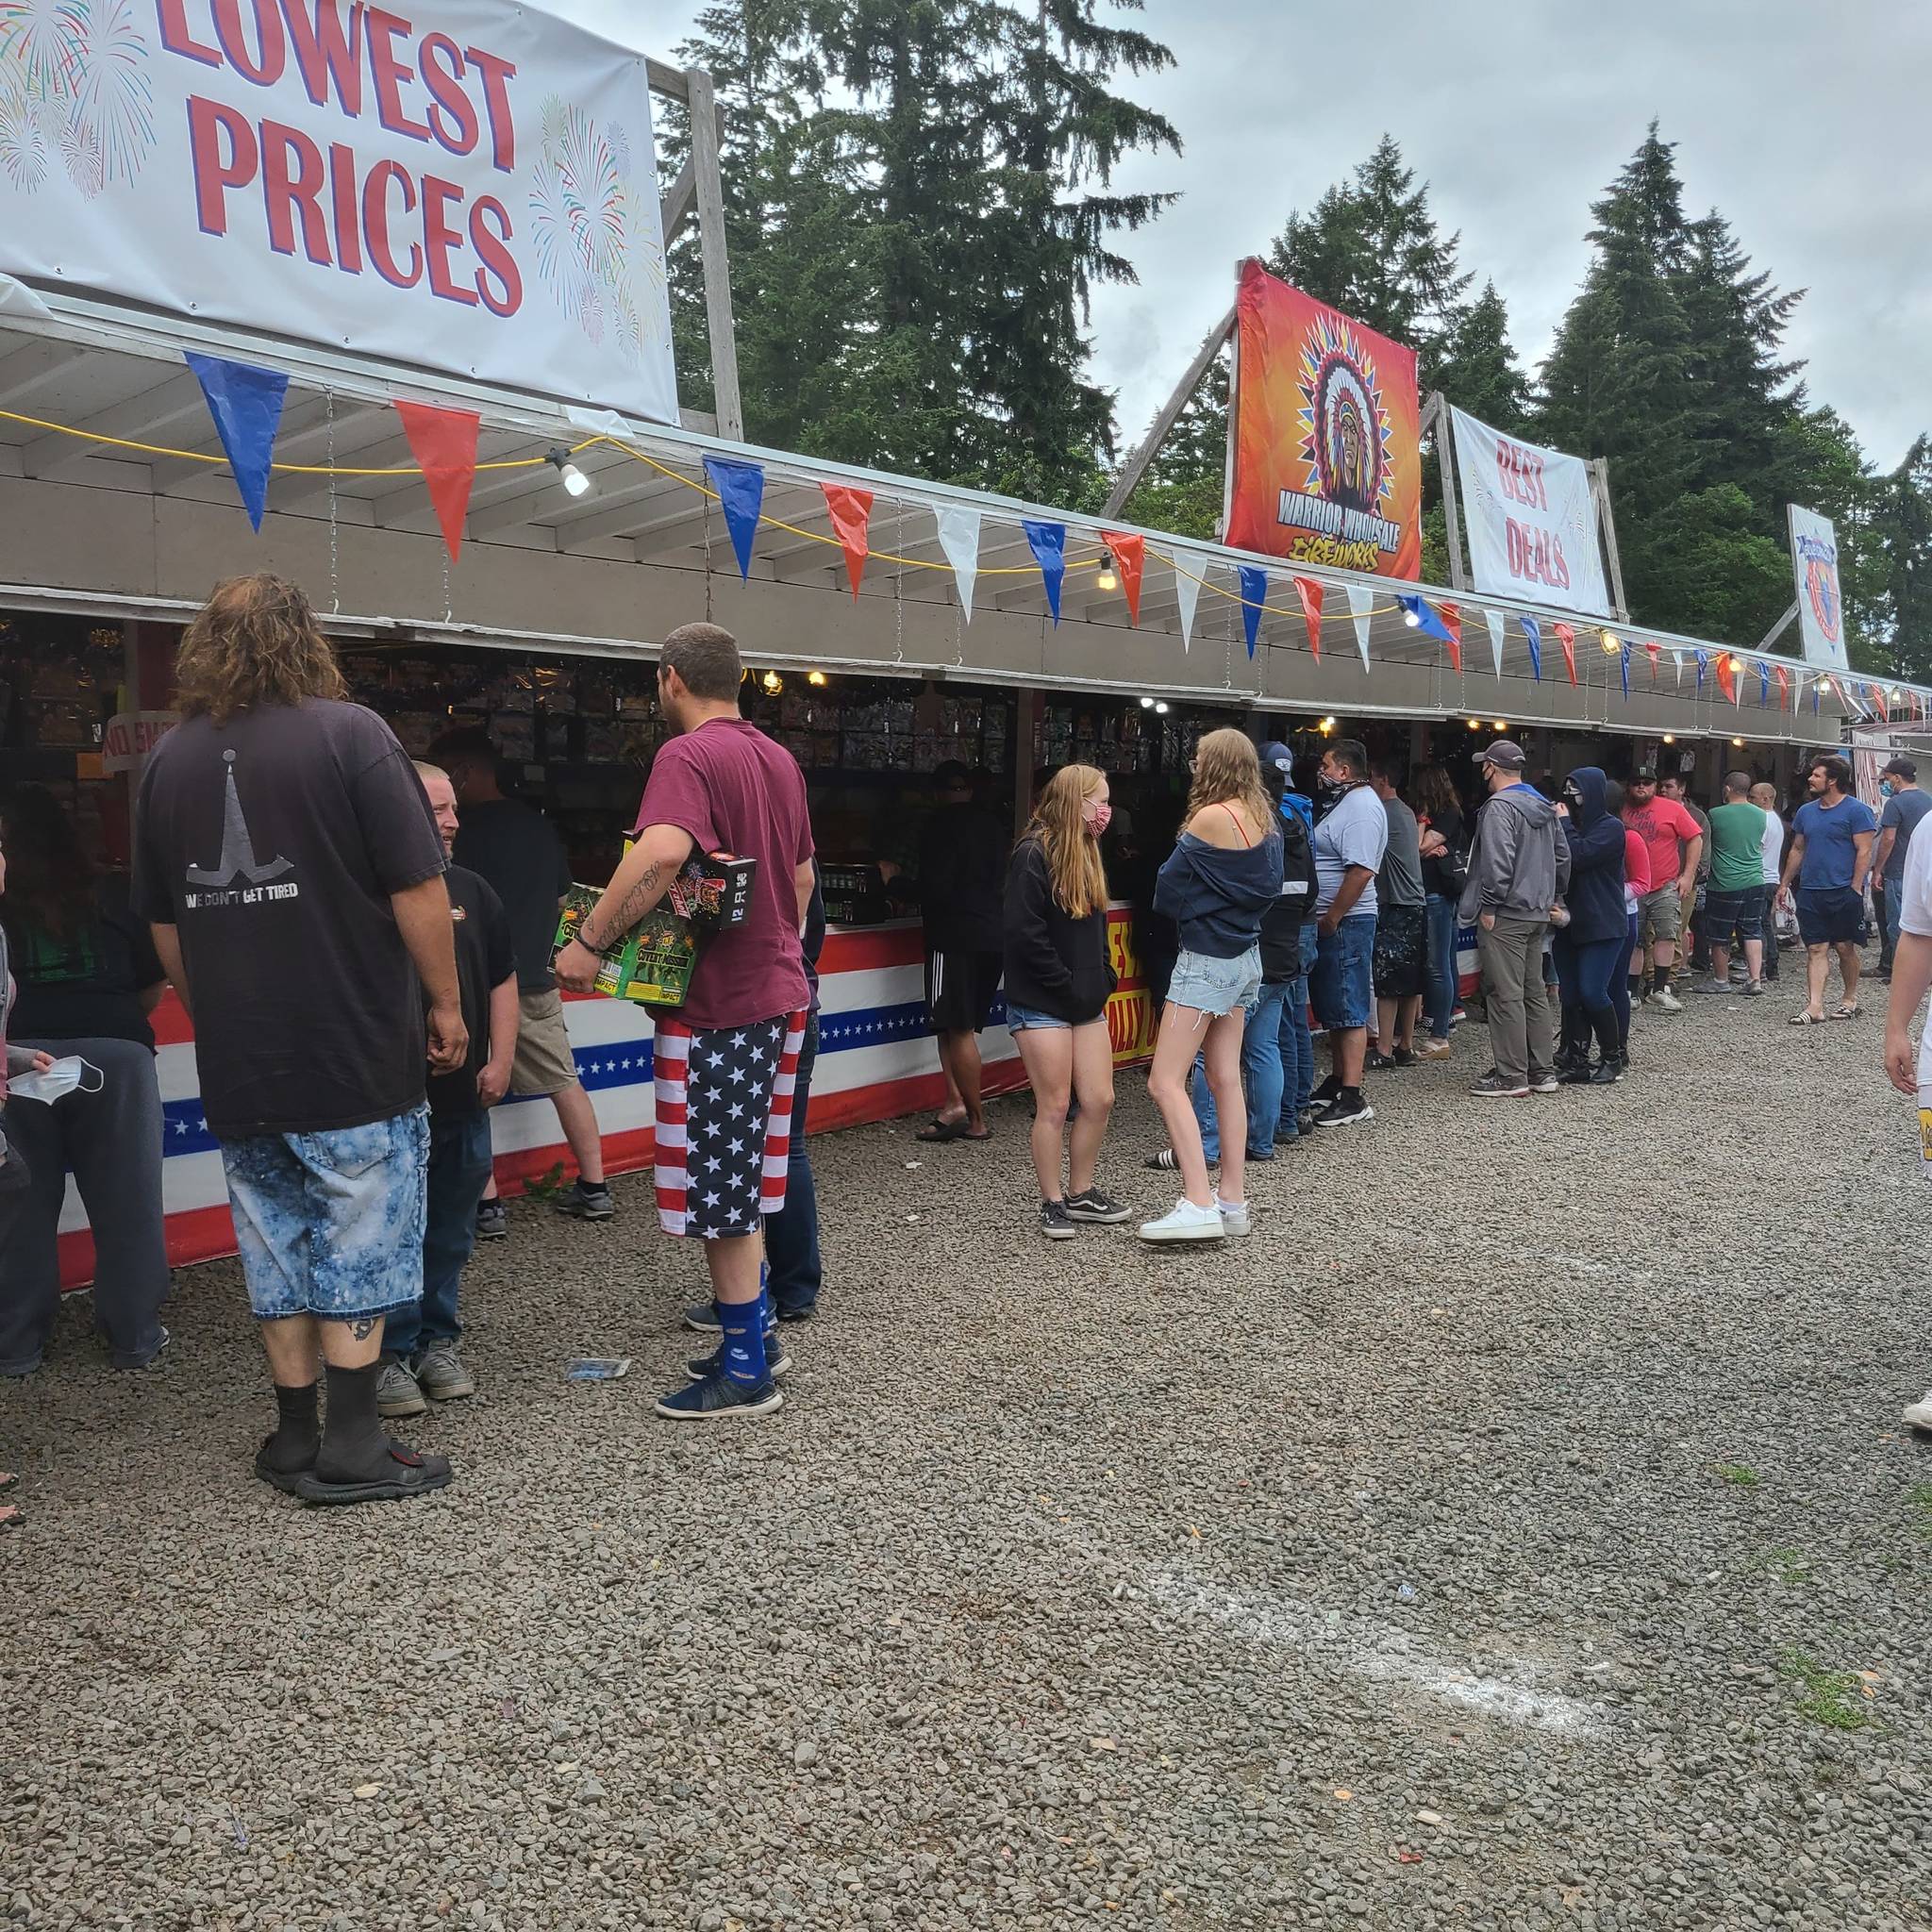 2020 a banner year for fireworks stands